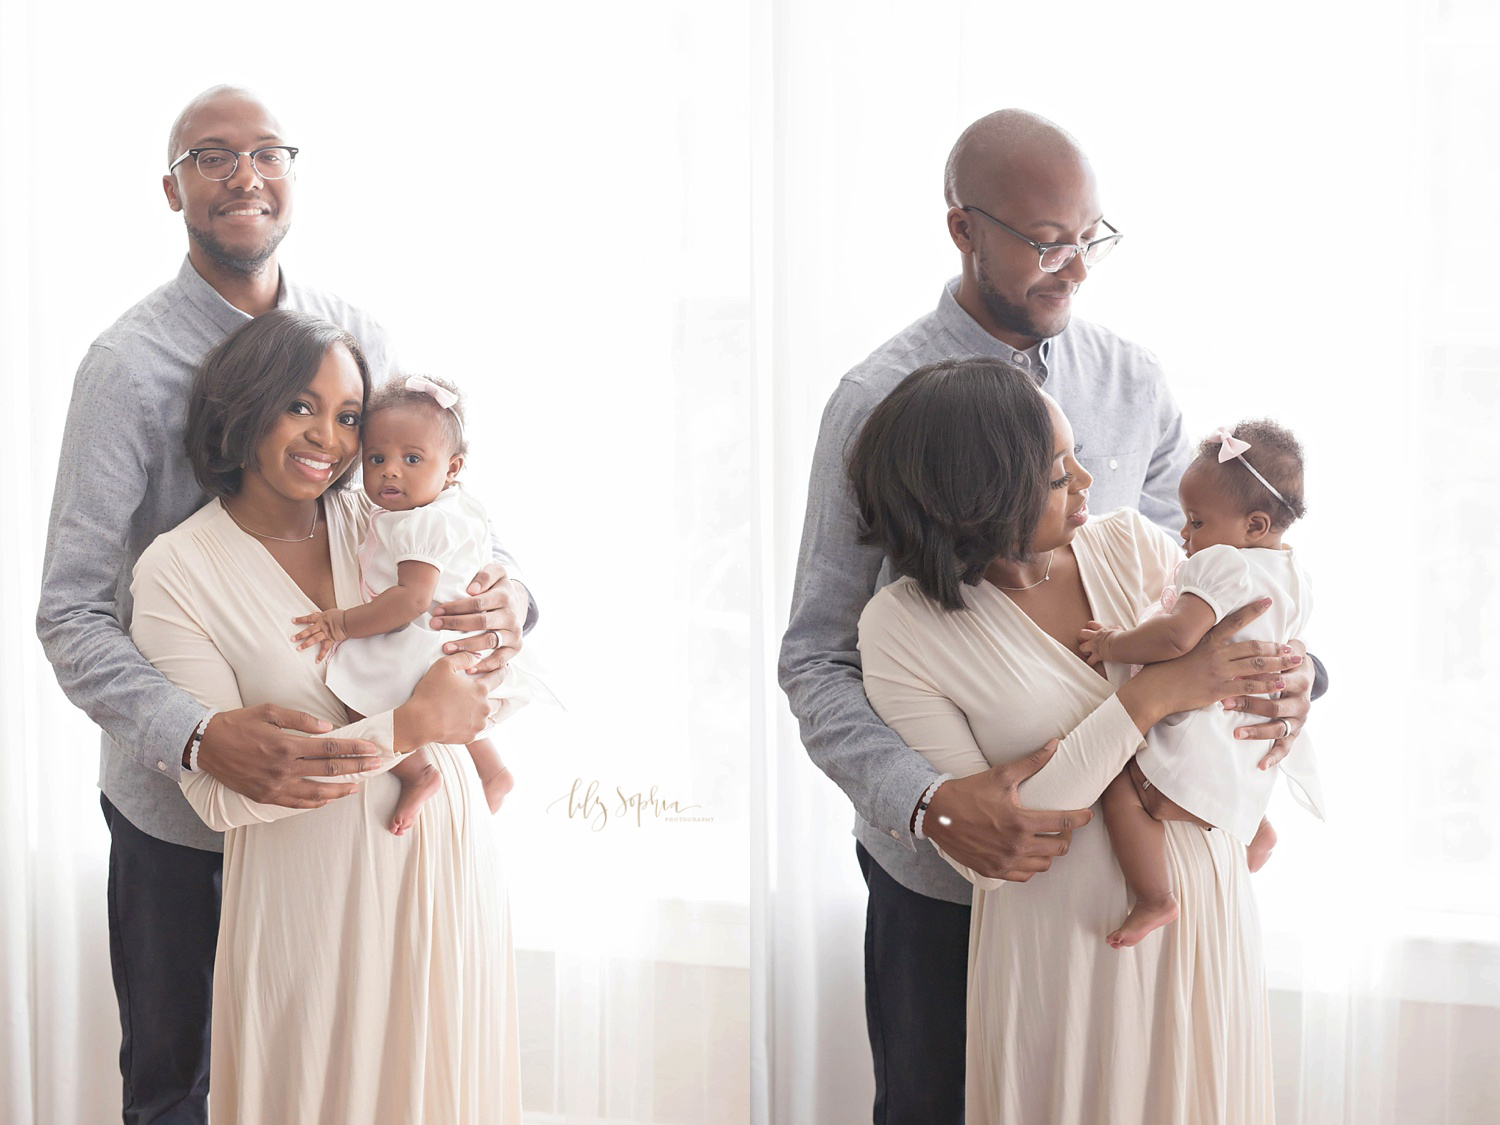  Side by side images of an African American family of three. In the first image, they are all looking at the camera and smiling, in the second image, the mother and father are looking at their baby girl.&nbsp; 